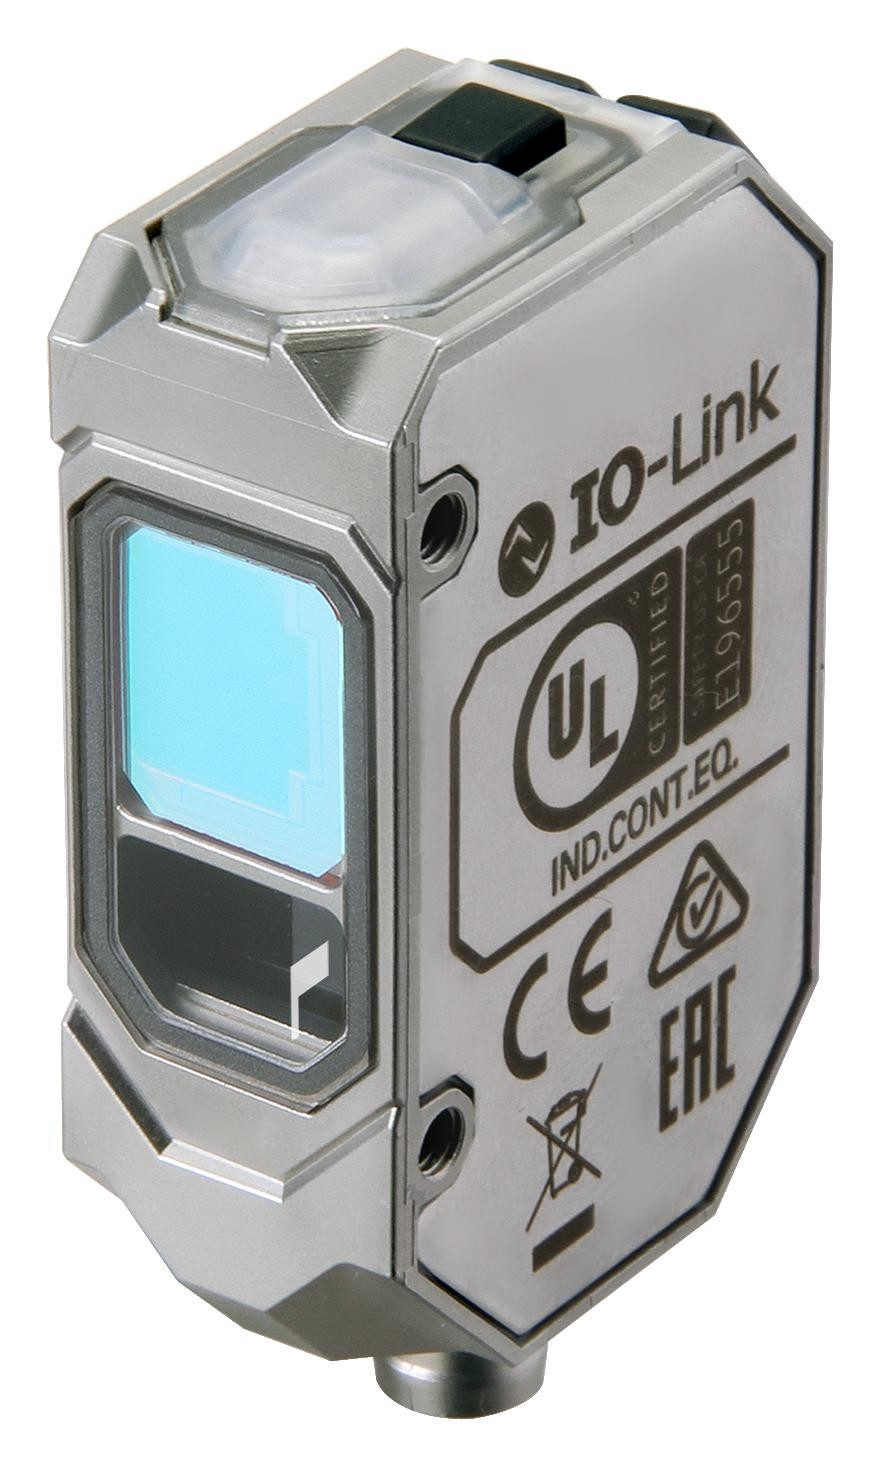 Omron Industrial Automation E3As-Hl500Lmt M3 Photo Sensor, Triangulation, M8, 500mm